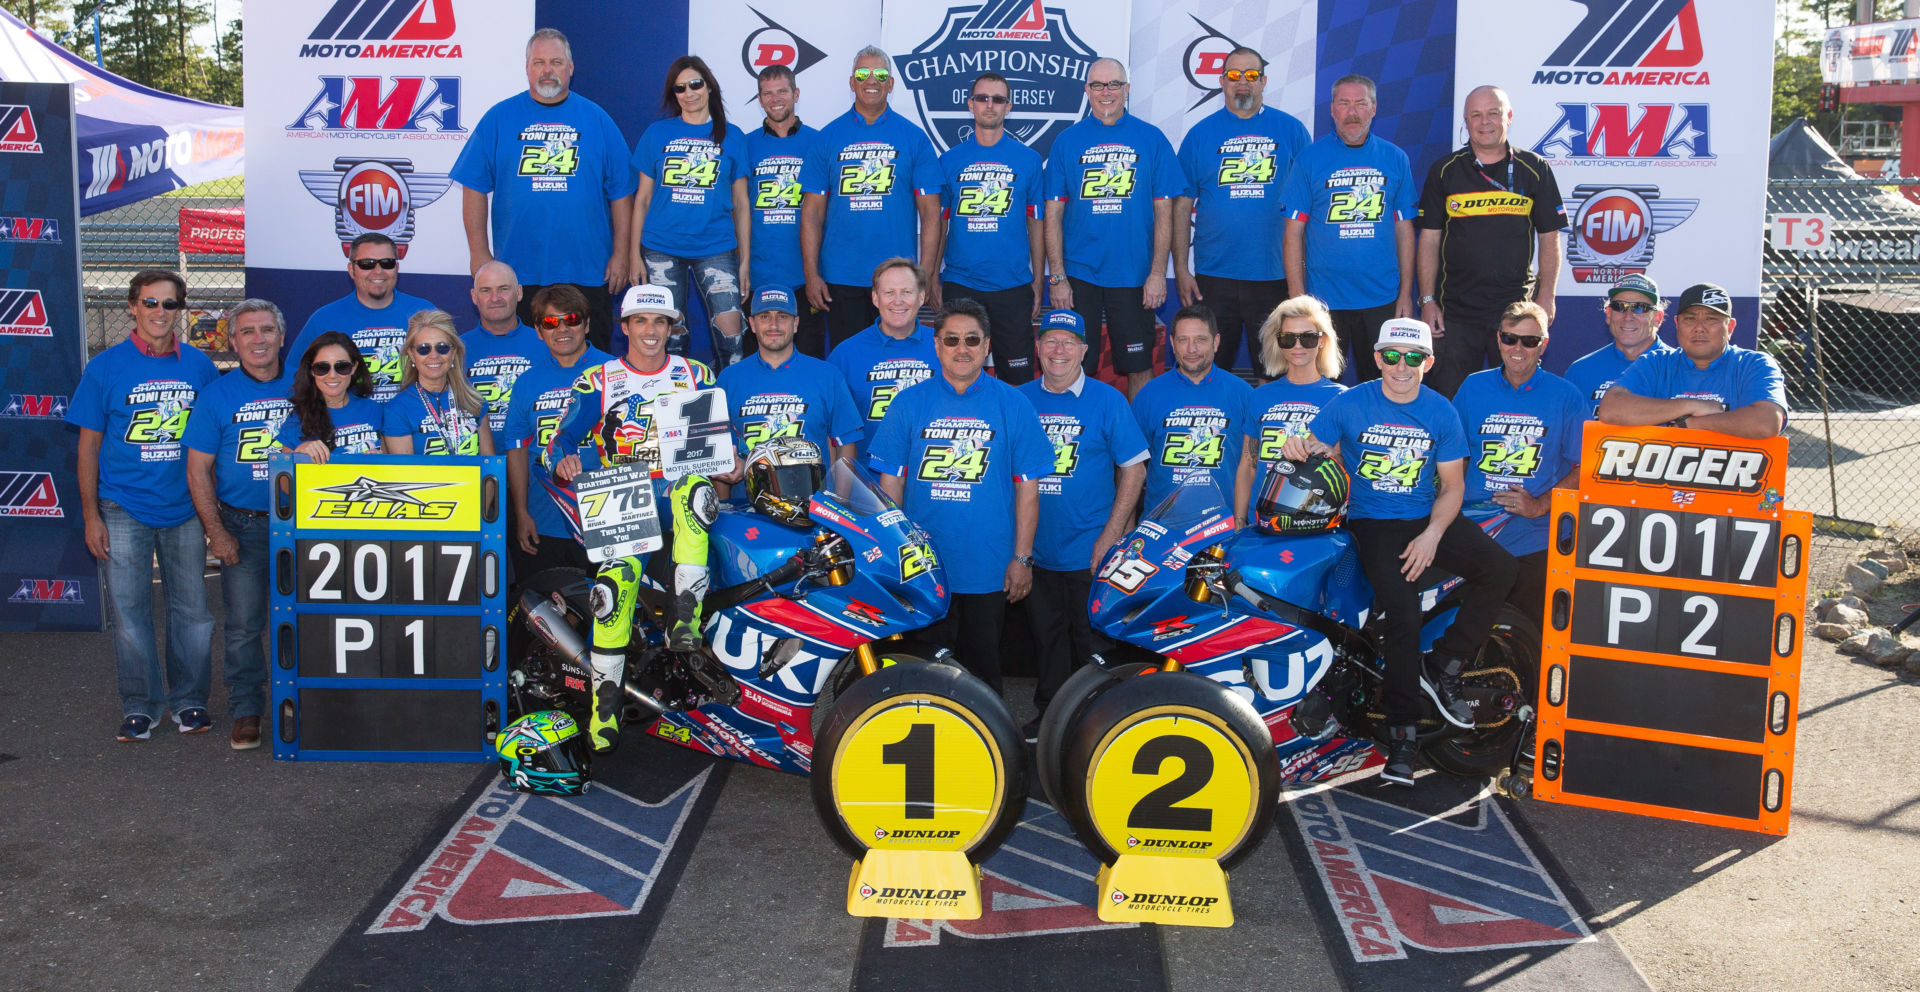 Hans Laske (back row, far left) was a long-time truck driver and crew member for Yoshimura Suzuki. This photo is from 2017 when Yoshimura Suzuki's Toni Elias and Roger Hayden went 1-2 in the MotoAmerica Superbike Championship. Photo by Brian J. Nelson.